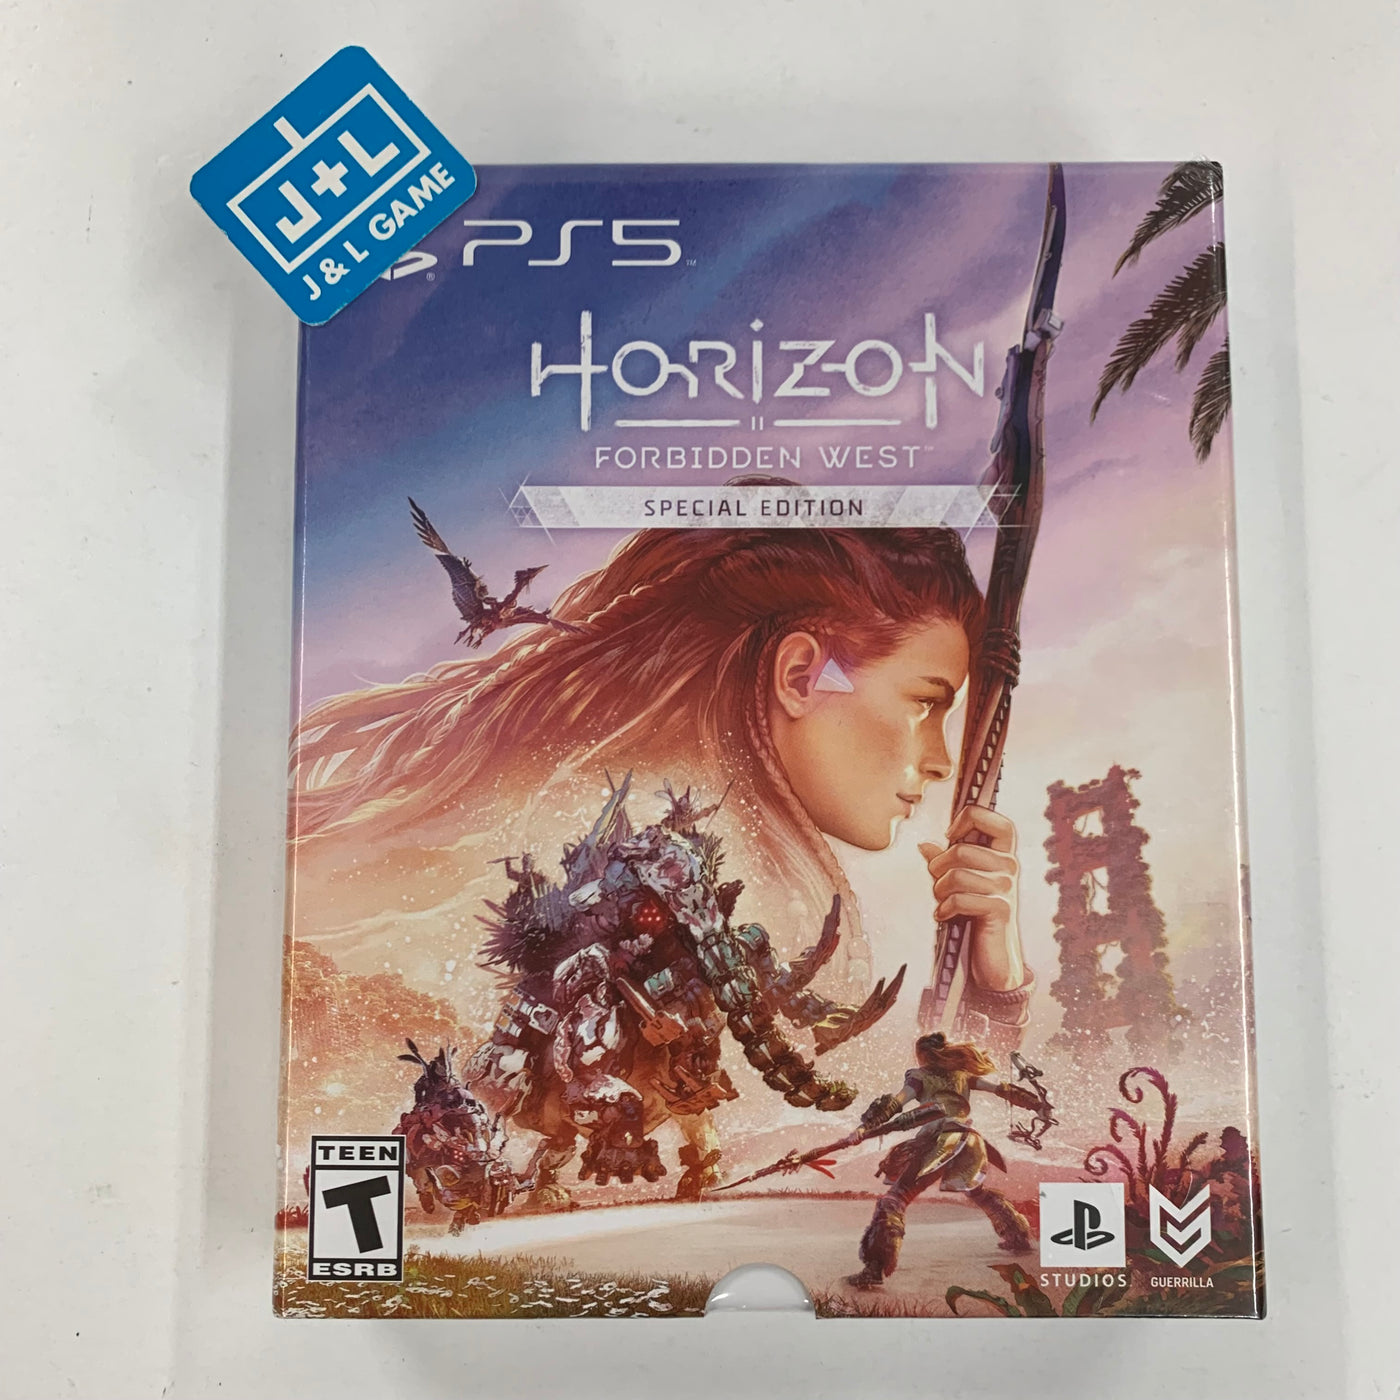 | Edition 5 (PS5) West PlayStation J&L Special Horizon Game - Forbidden